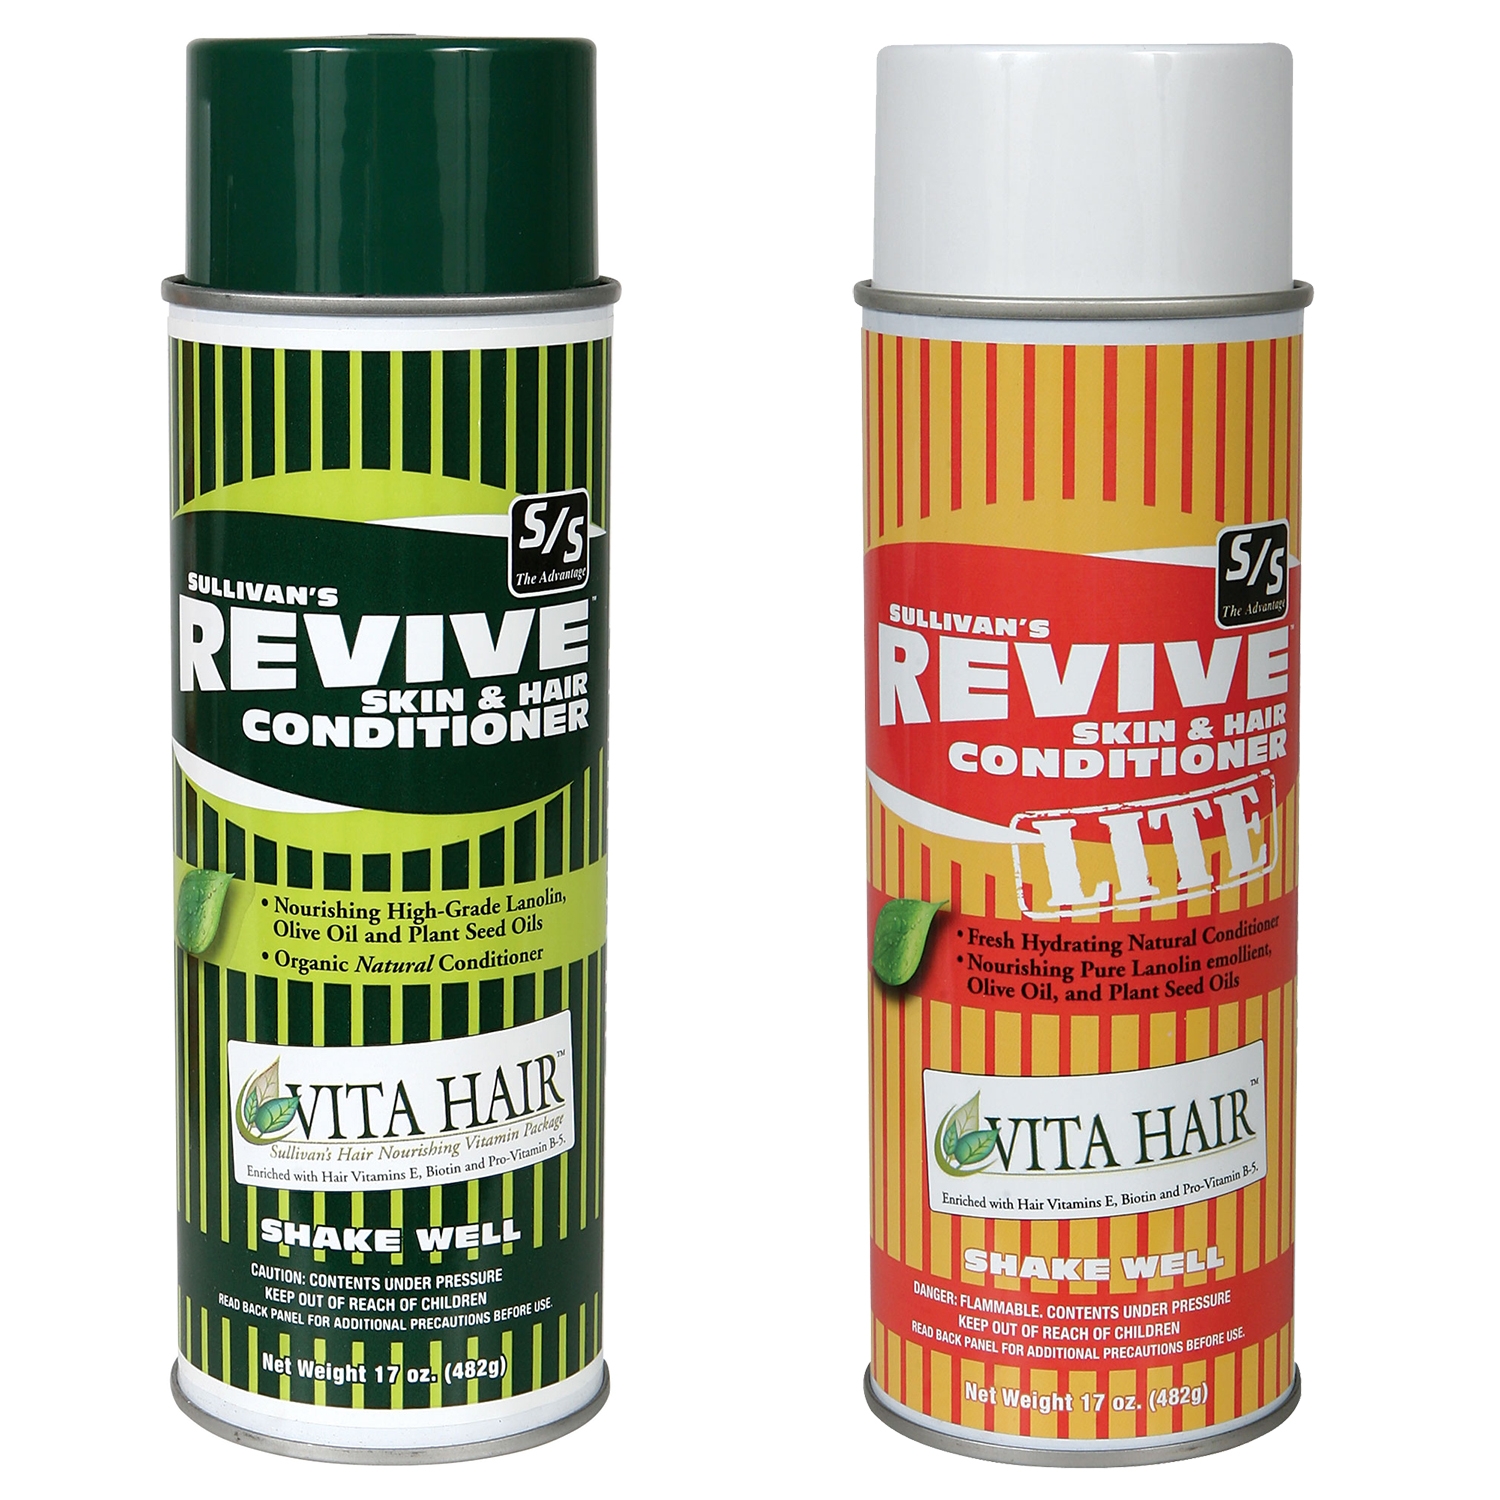 Sullivan's Revive Skin and Hair Conditioner